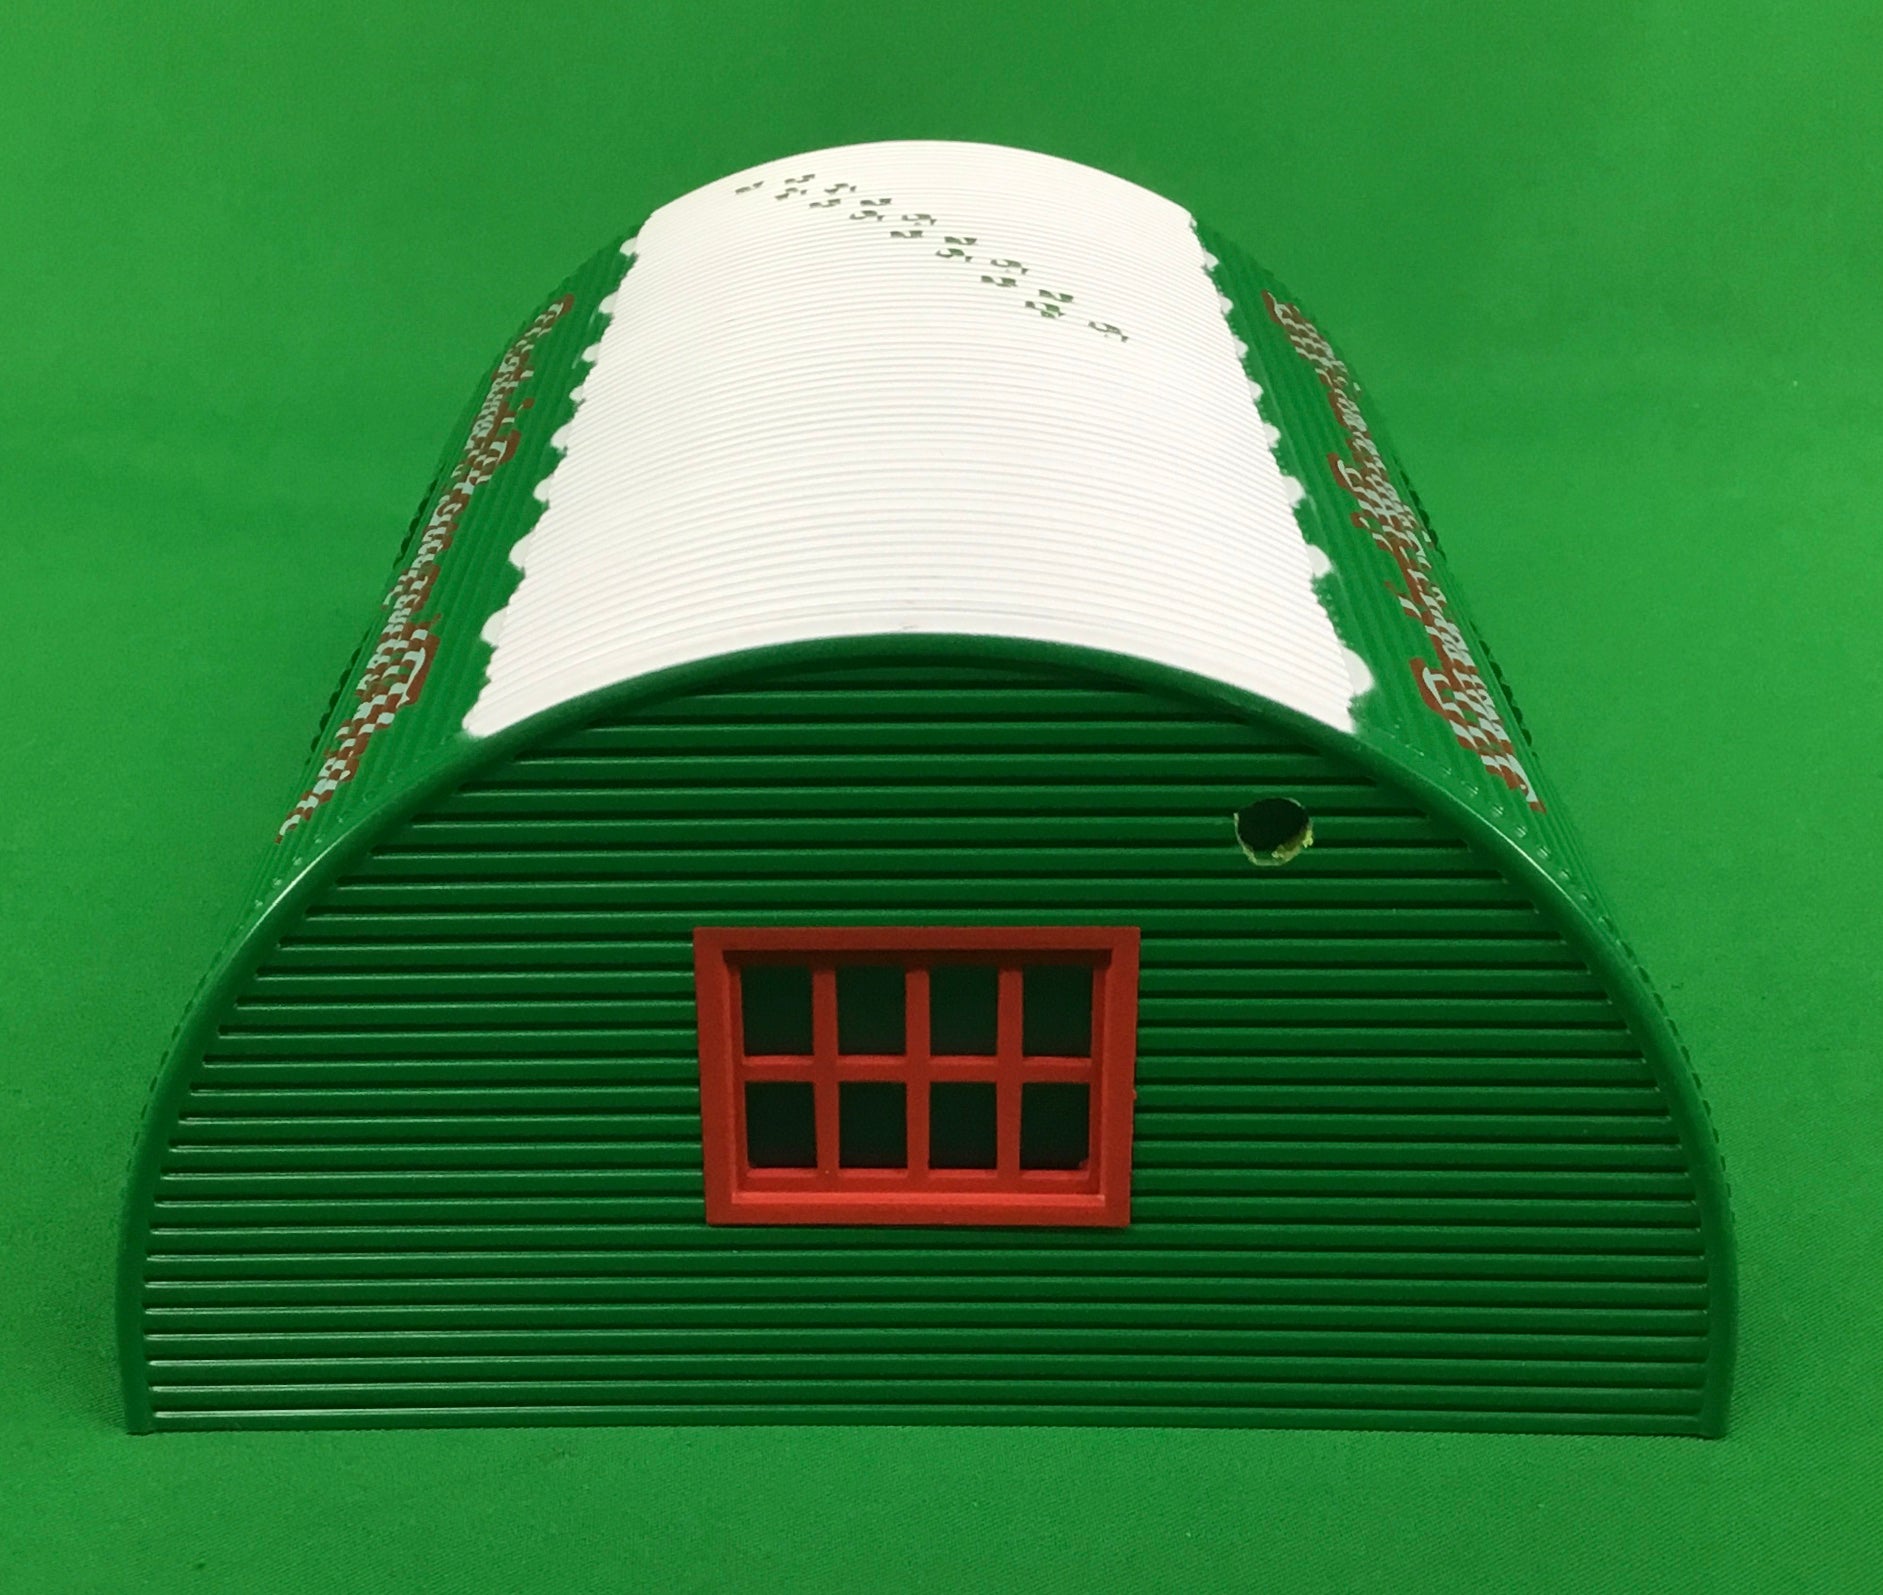 Lionel 2330140 - Quonset Hut "Dashers Buy & Fly"